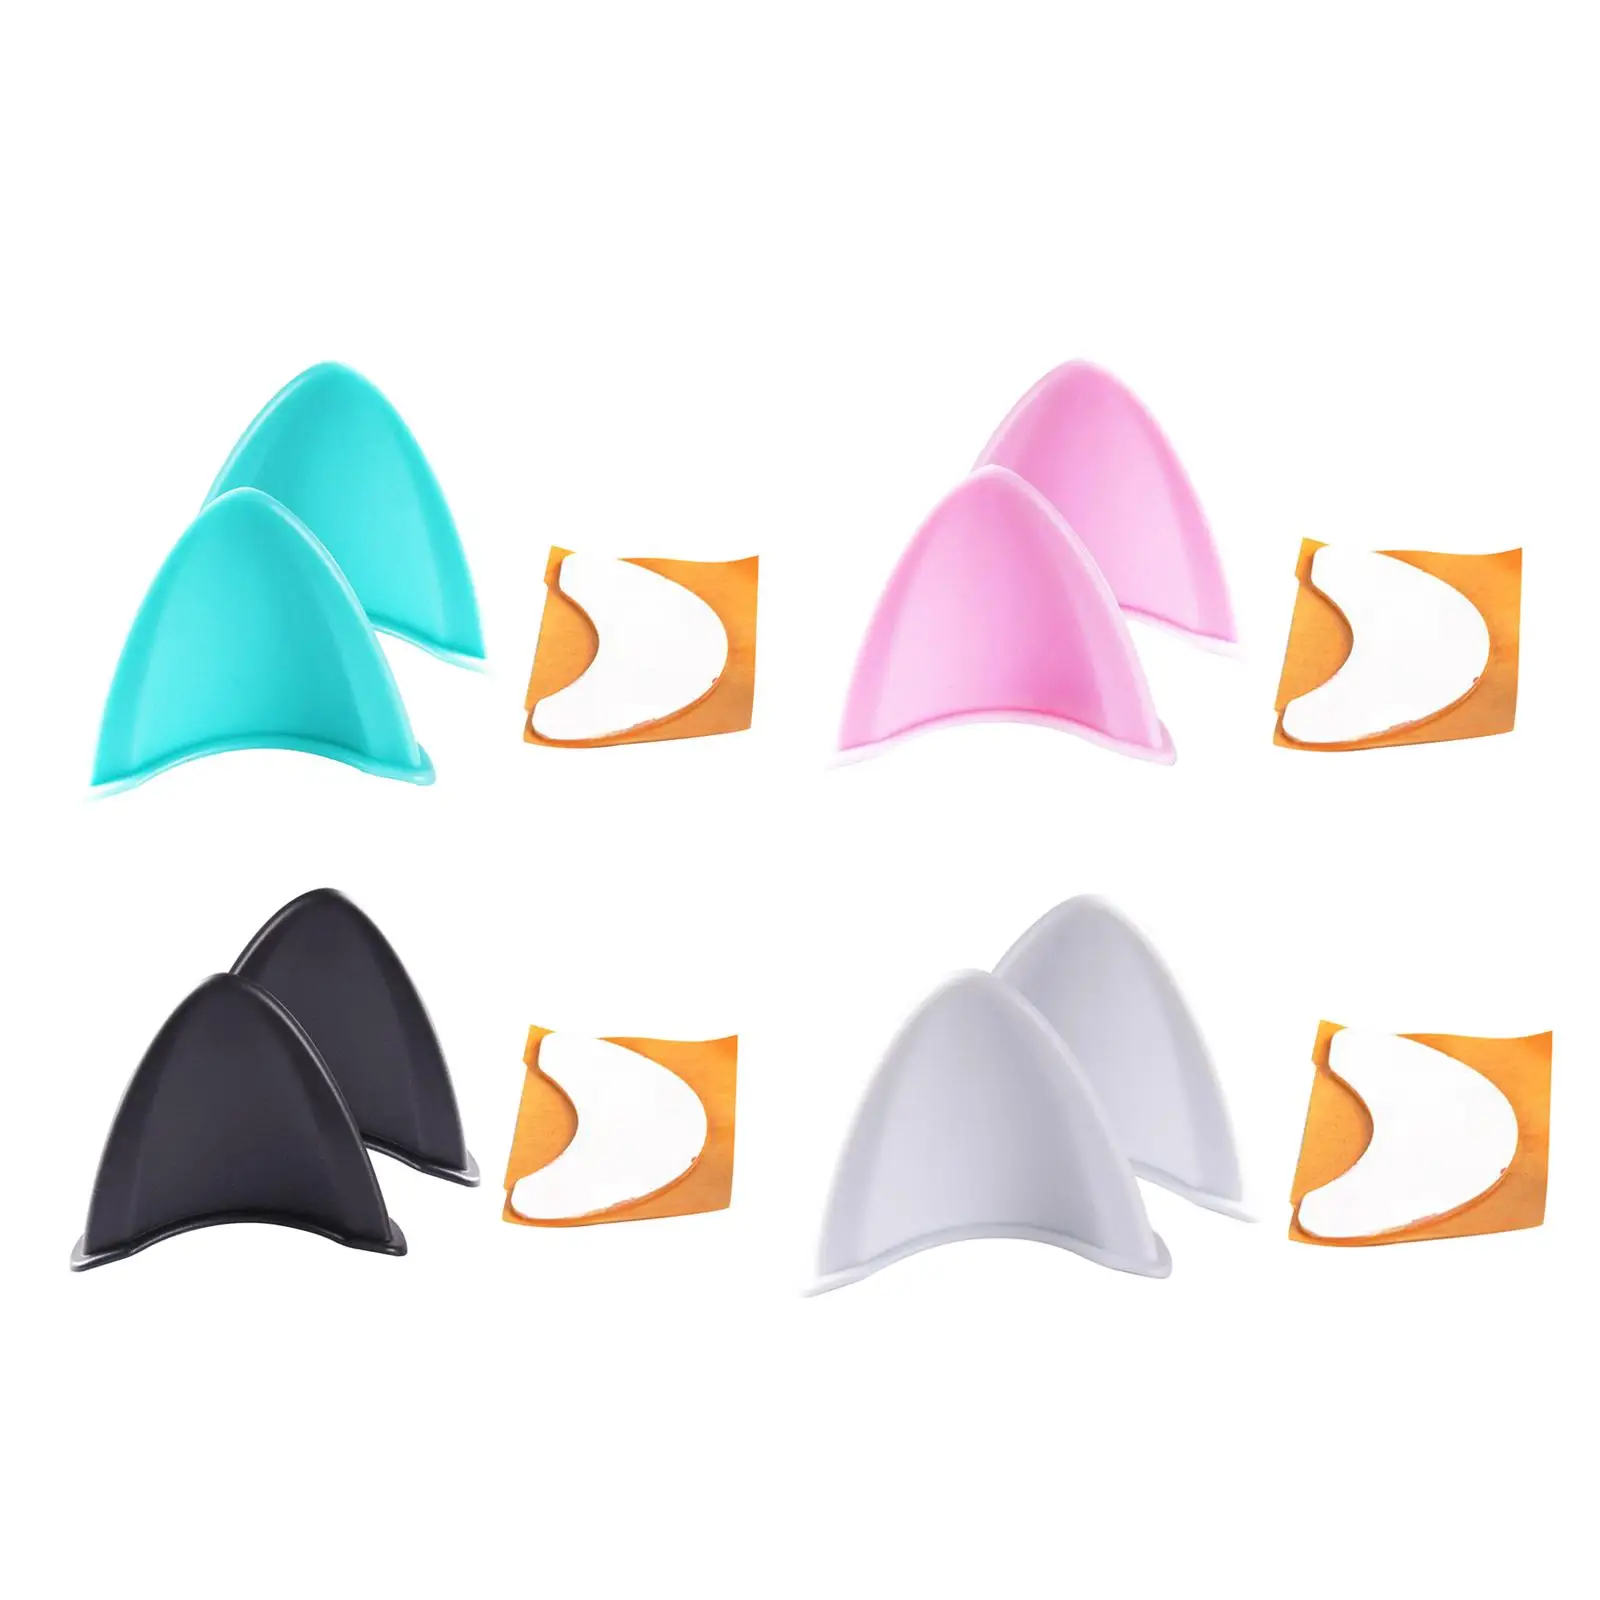 Helmet Cat Ears Sticker Accessory Decoration Easy Peel and Stick Adhesive for Bicycle Motorcycle Helmets Bike Scooter Ski